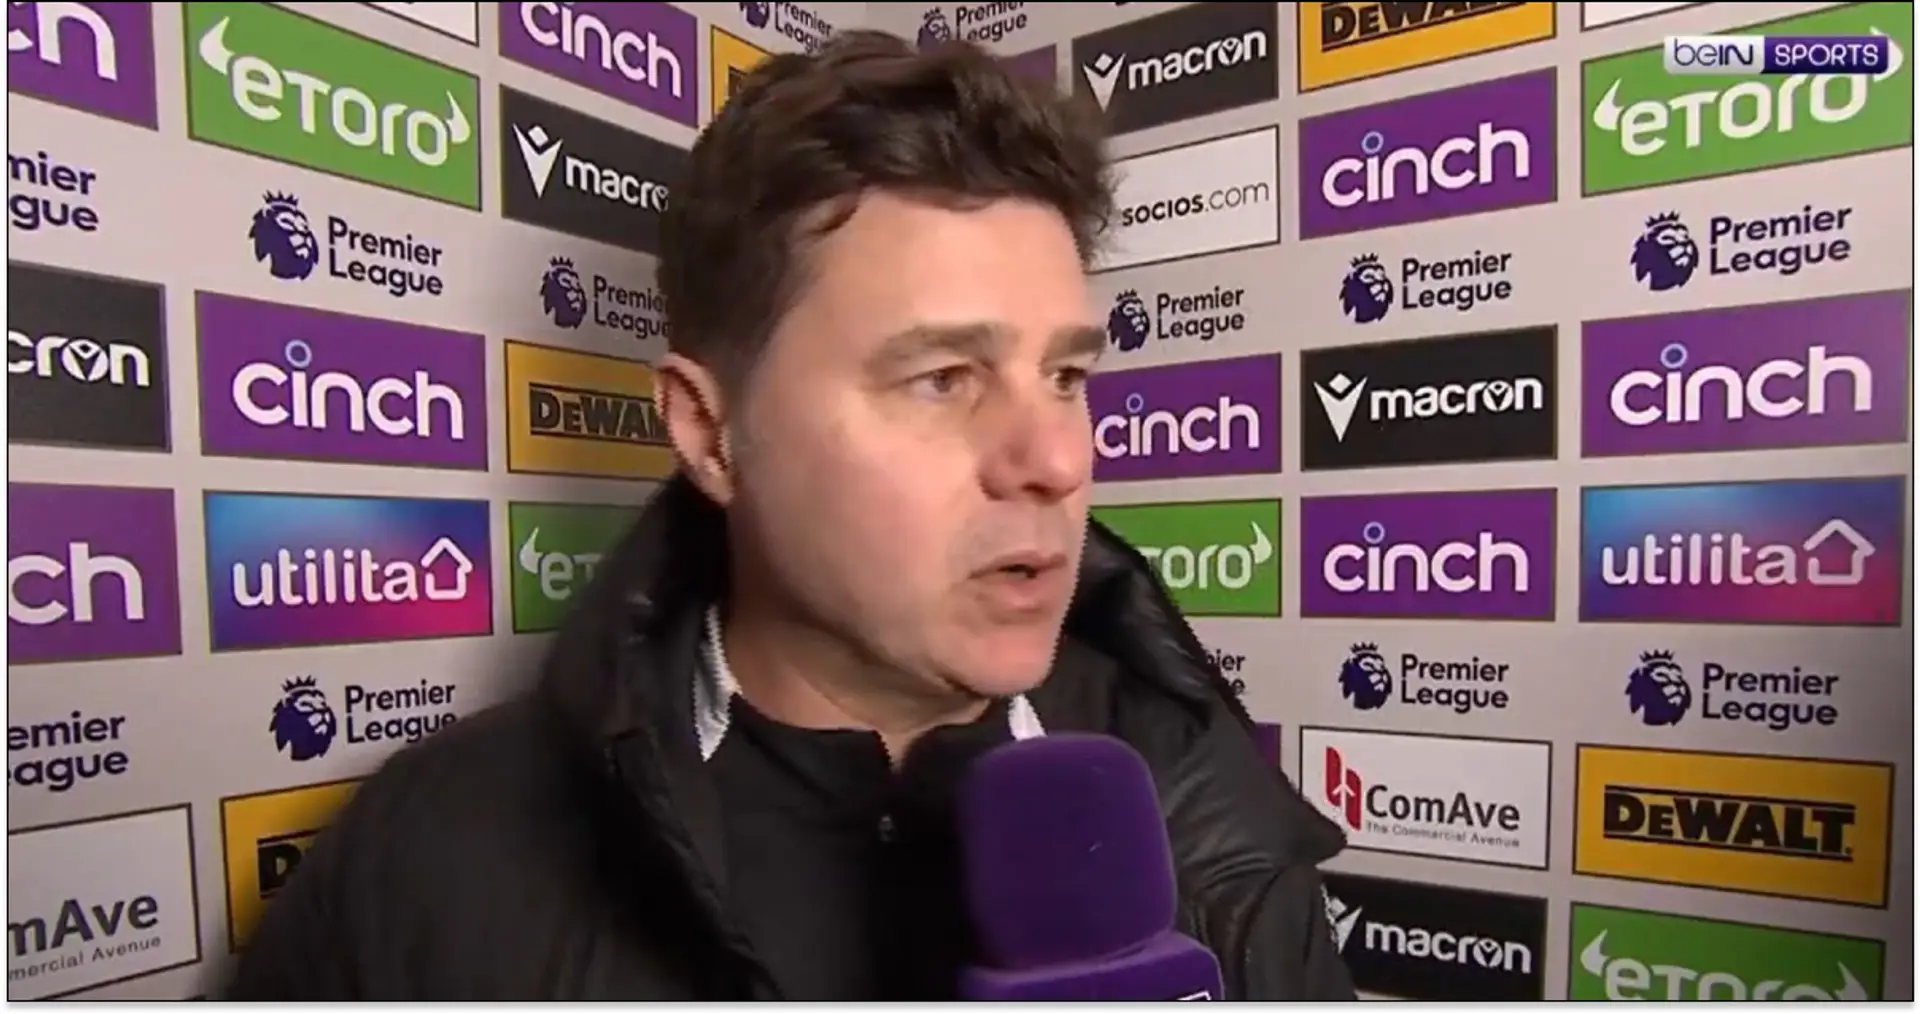 'Lack of quality': Poch explains why Chelsea were so bad in first half v Palace